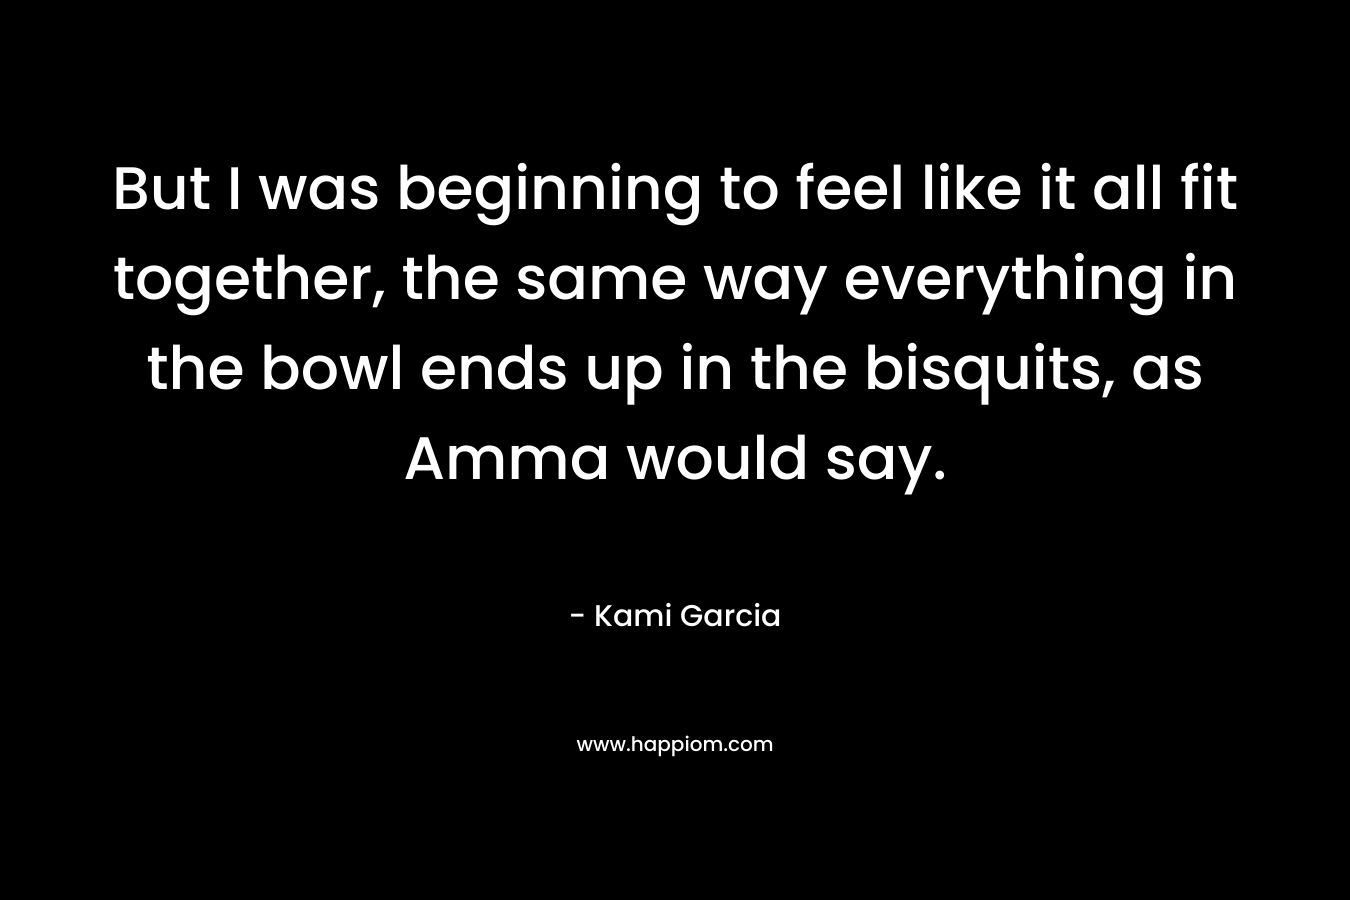 But I was beginning to feel like it all fit together, the same way everything in the bowl ends up in the bisquits, as Amma would say.